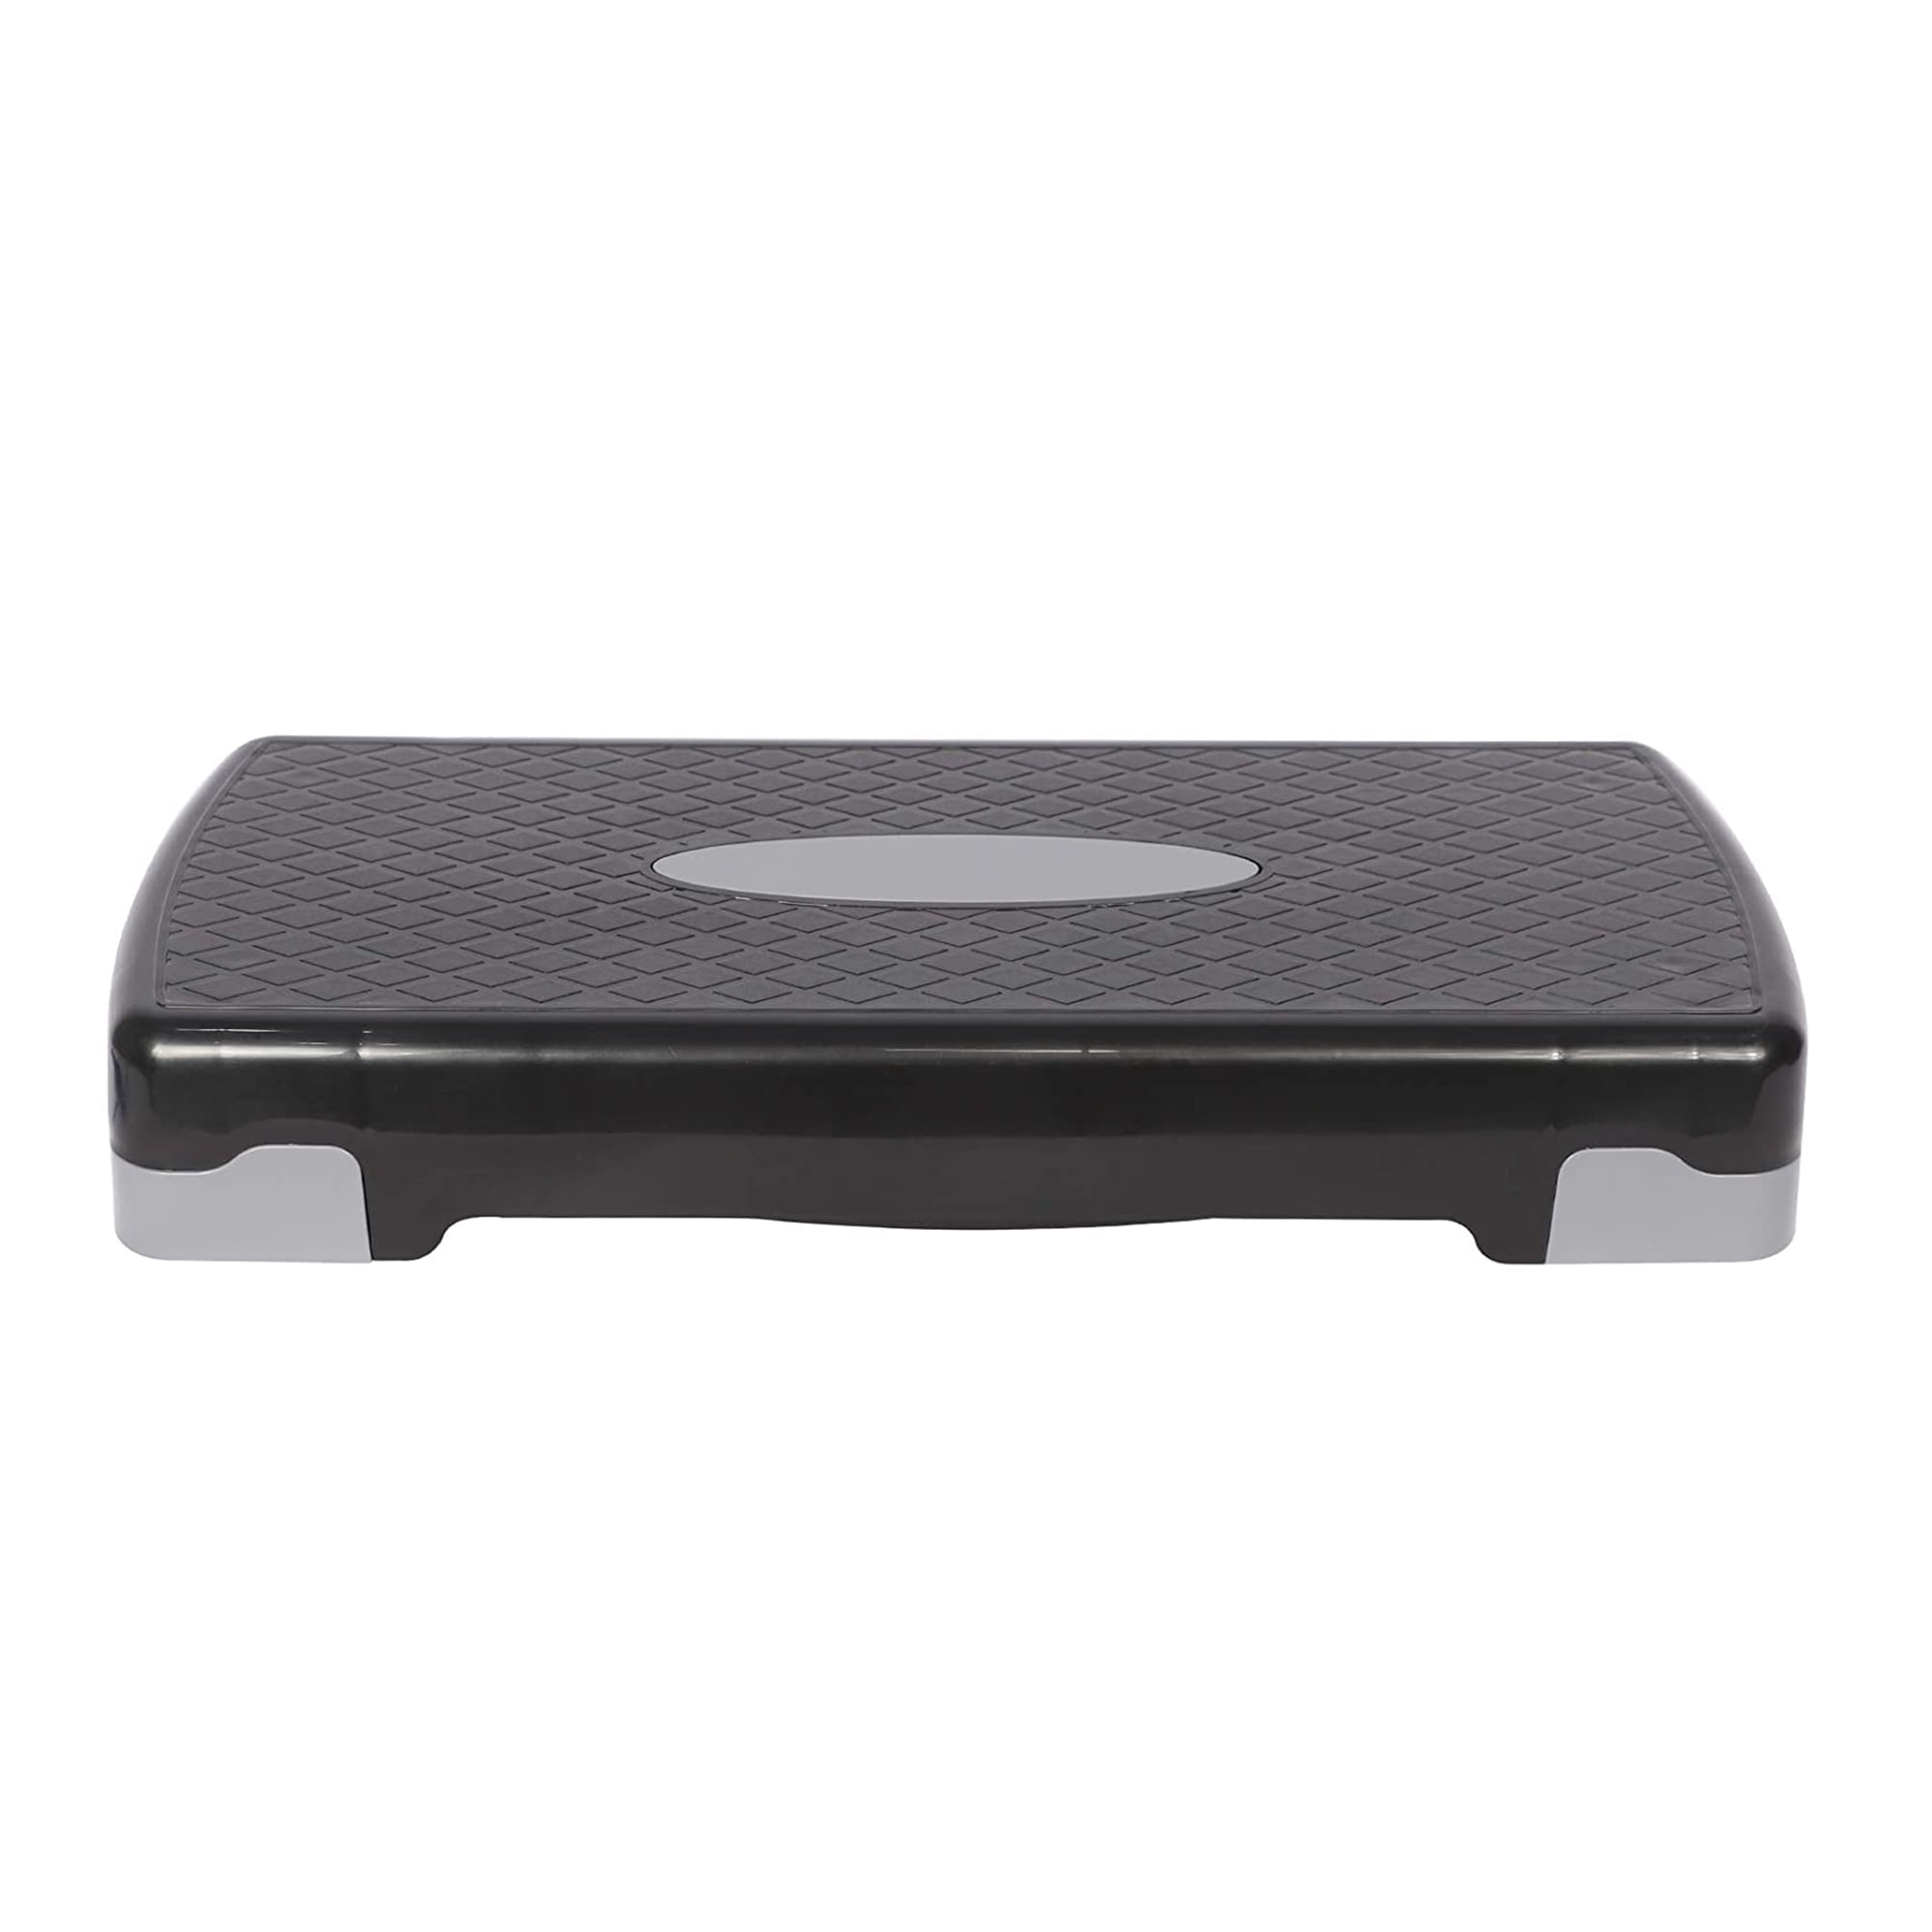 8" Aerobic Step Non-Slip Surface Platform Fitness Details about   28" Height-Adjustable 4-6 